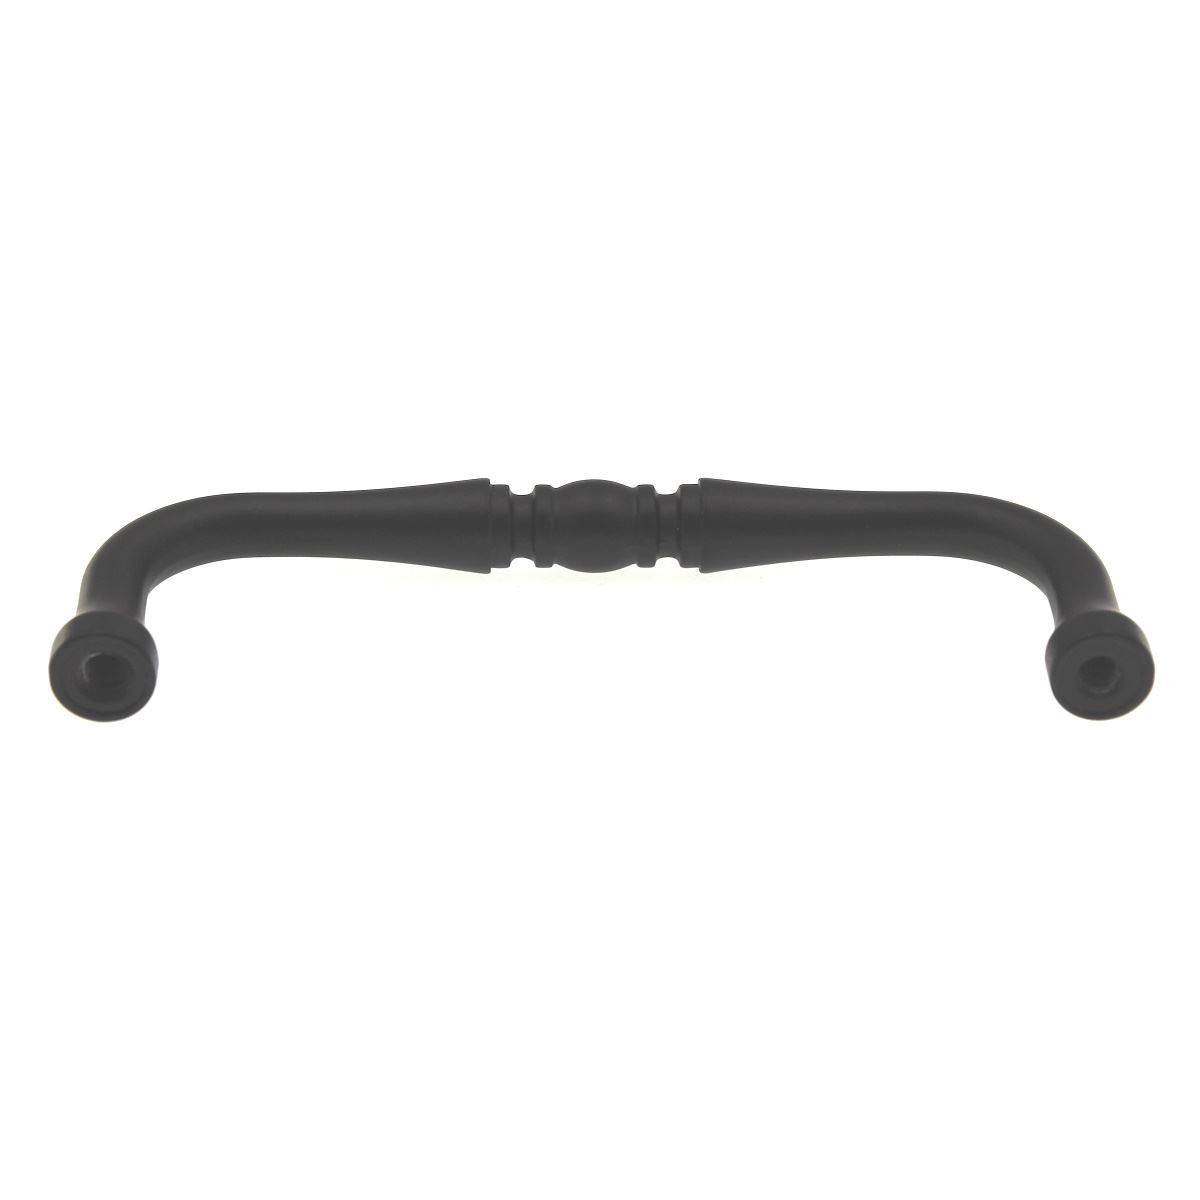 Hickory Hardware Williamsburg 3 1/2" Ctr Arch Pull Oil-Rubbed Bronze P3059-10B